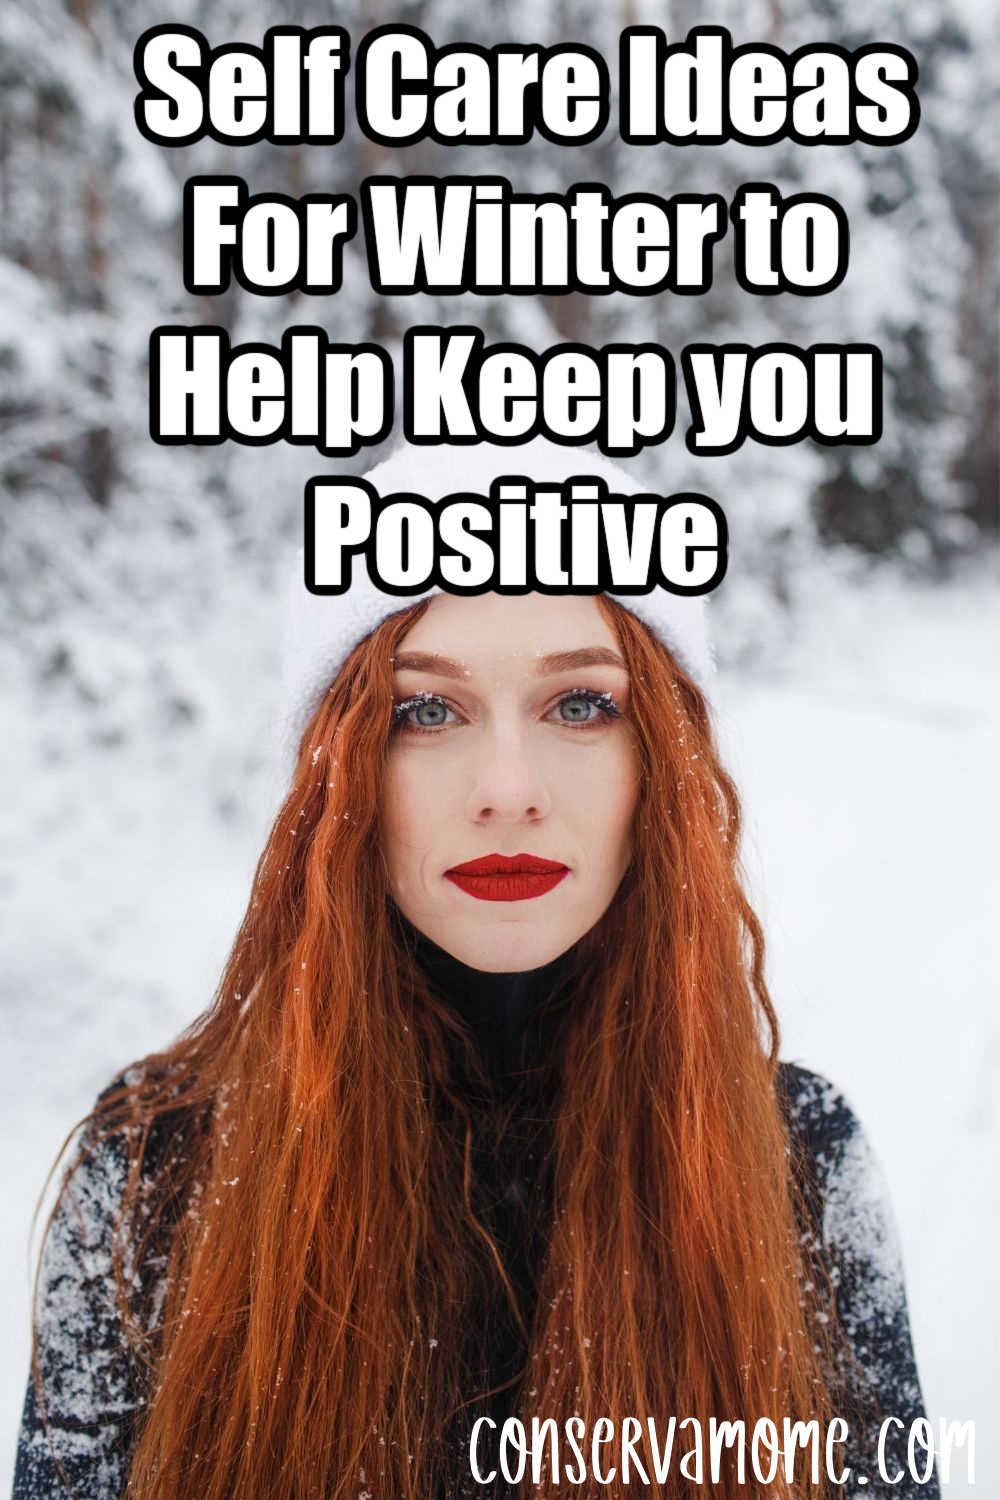  Self Care Ideas For Winter to Help Keep you Positive